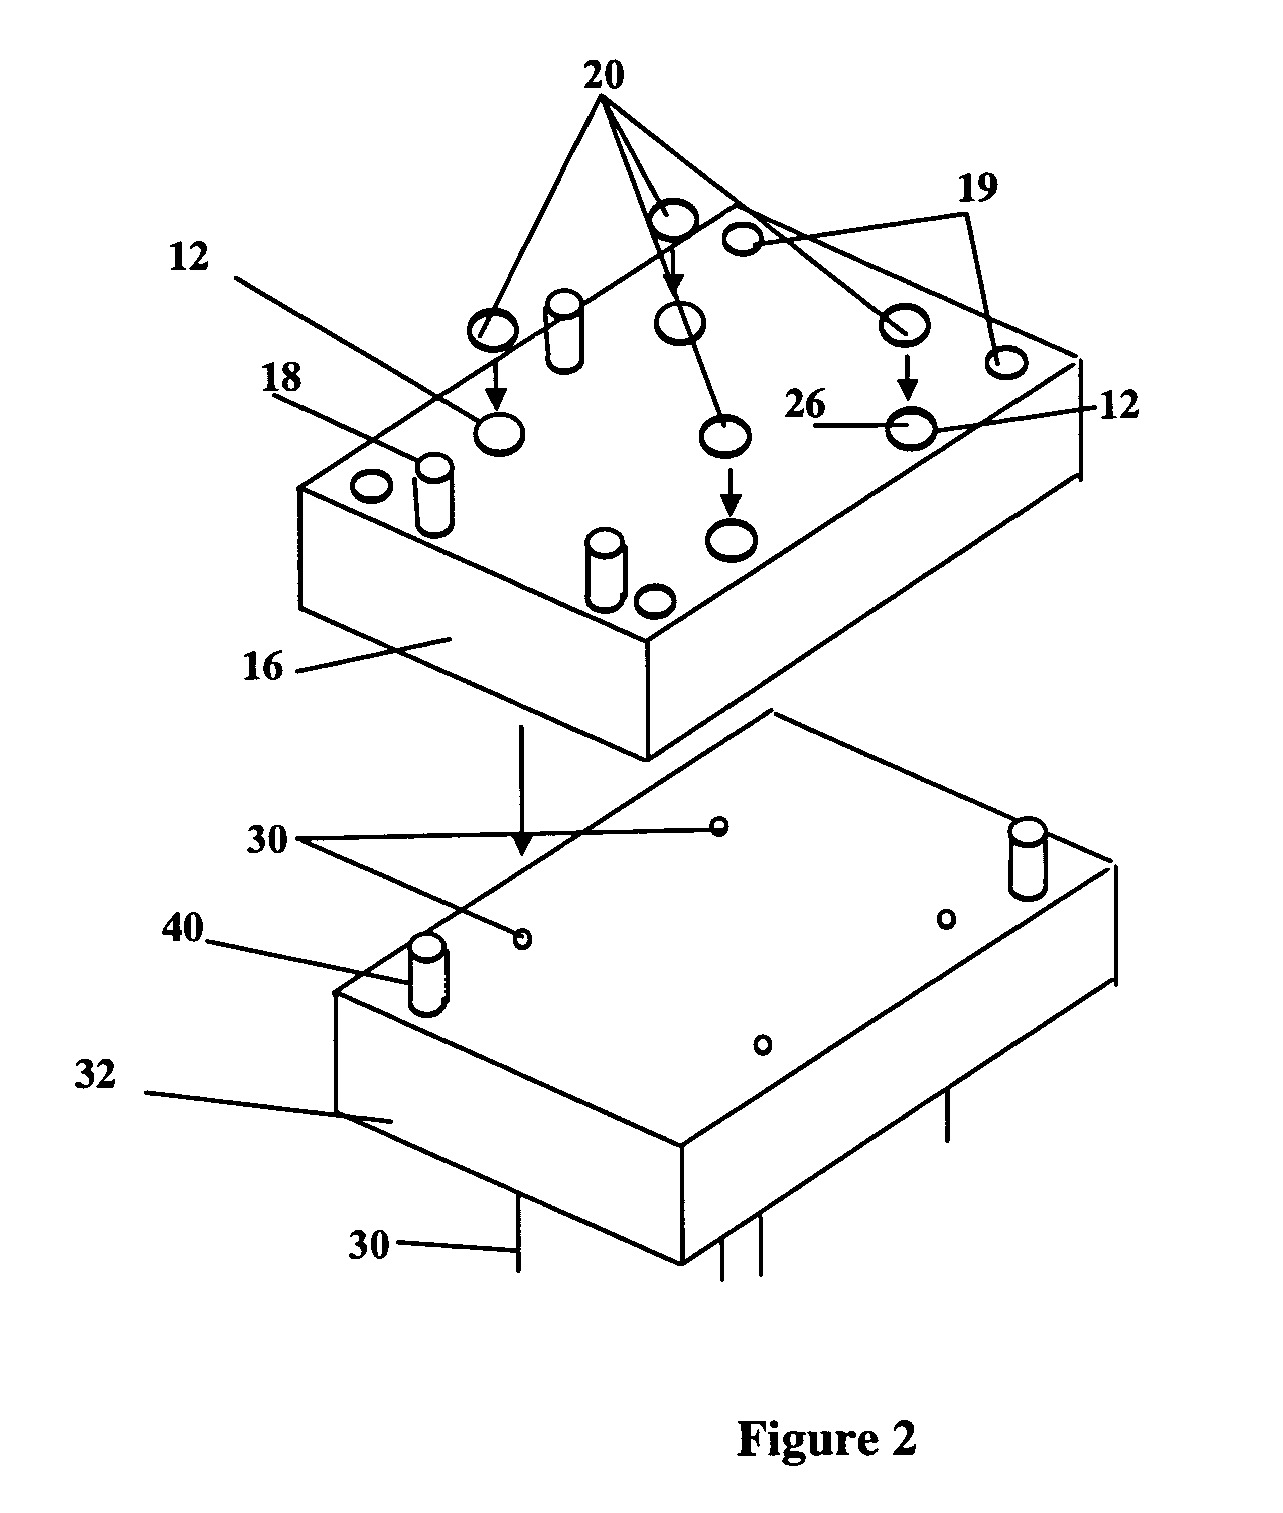 Method for bonding and debonding a workpiece to a manufacturing fixture